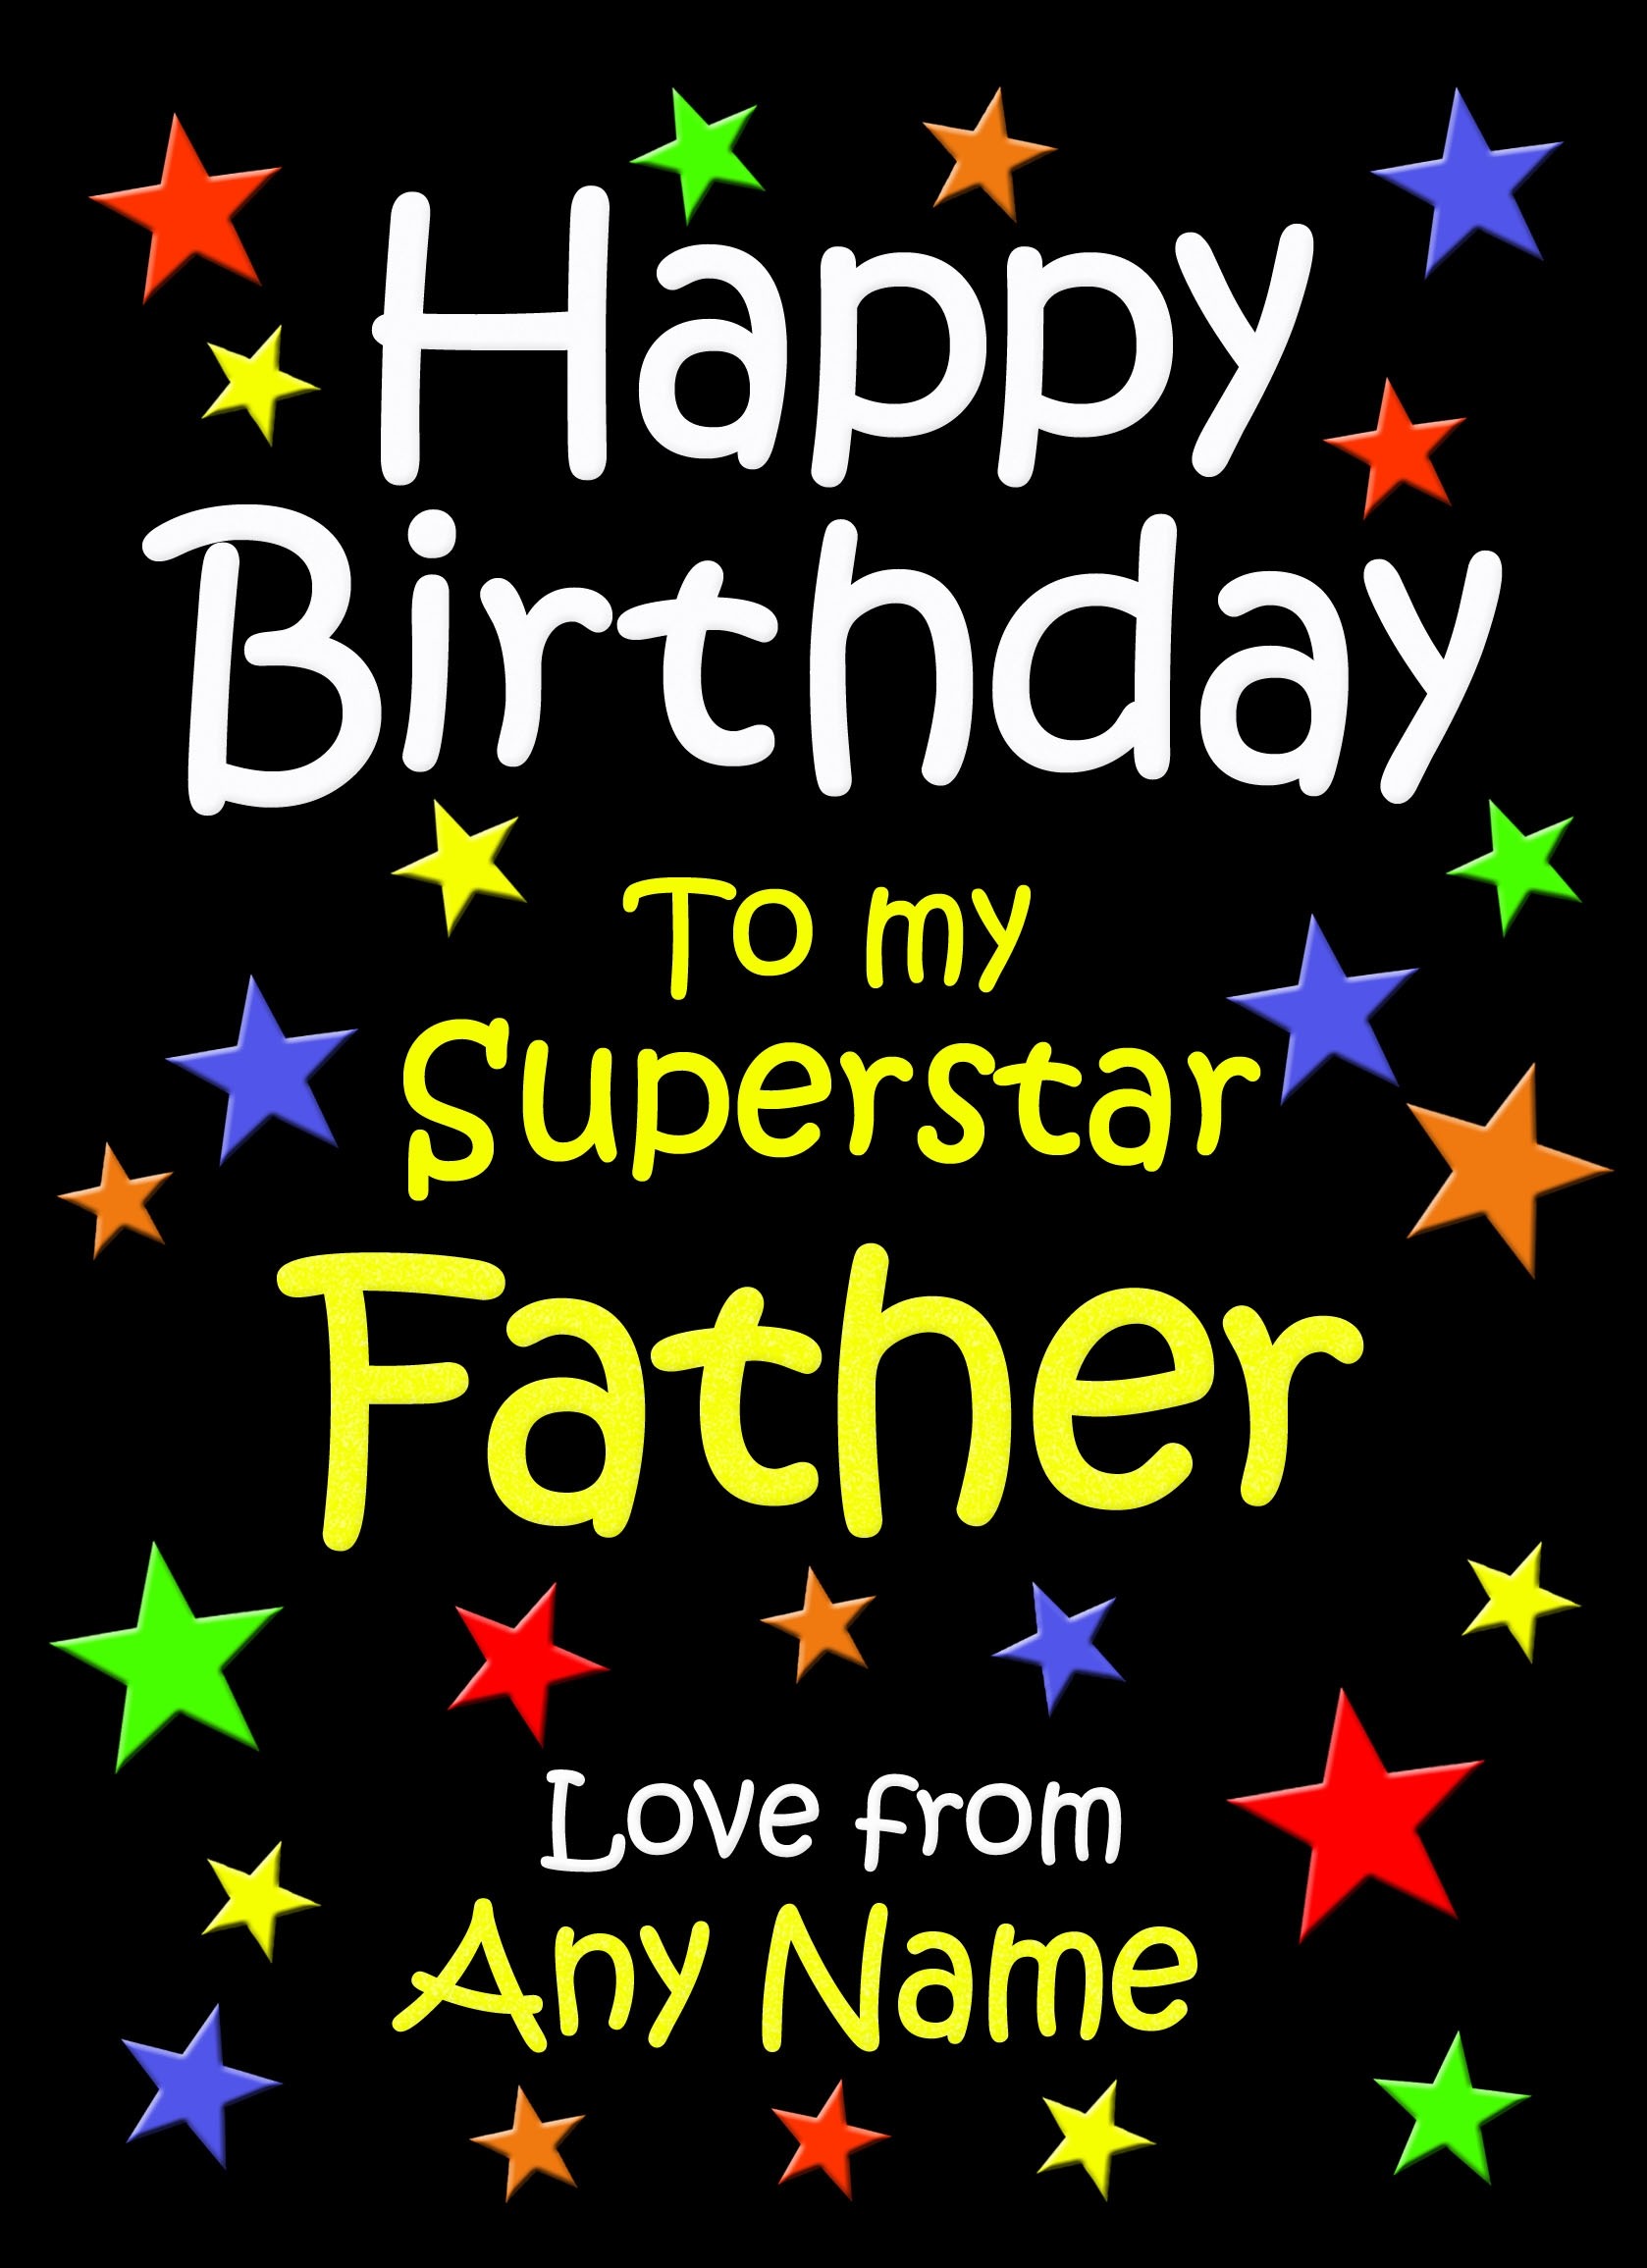 Personalised Father Birthday Card (Black)